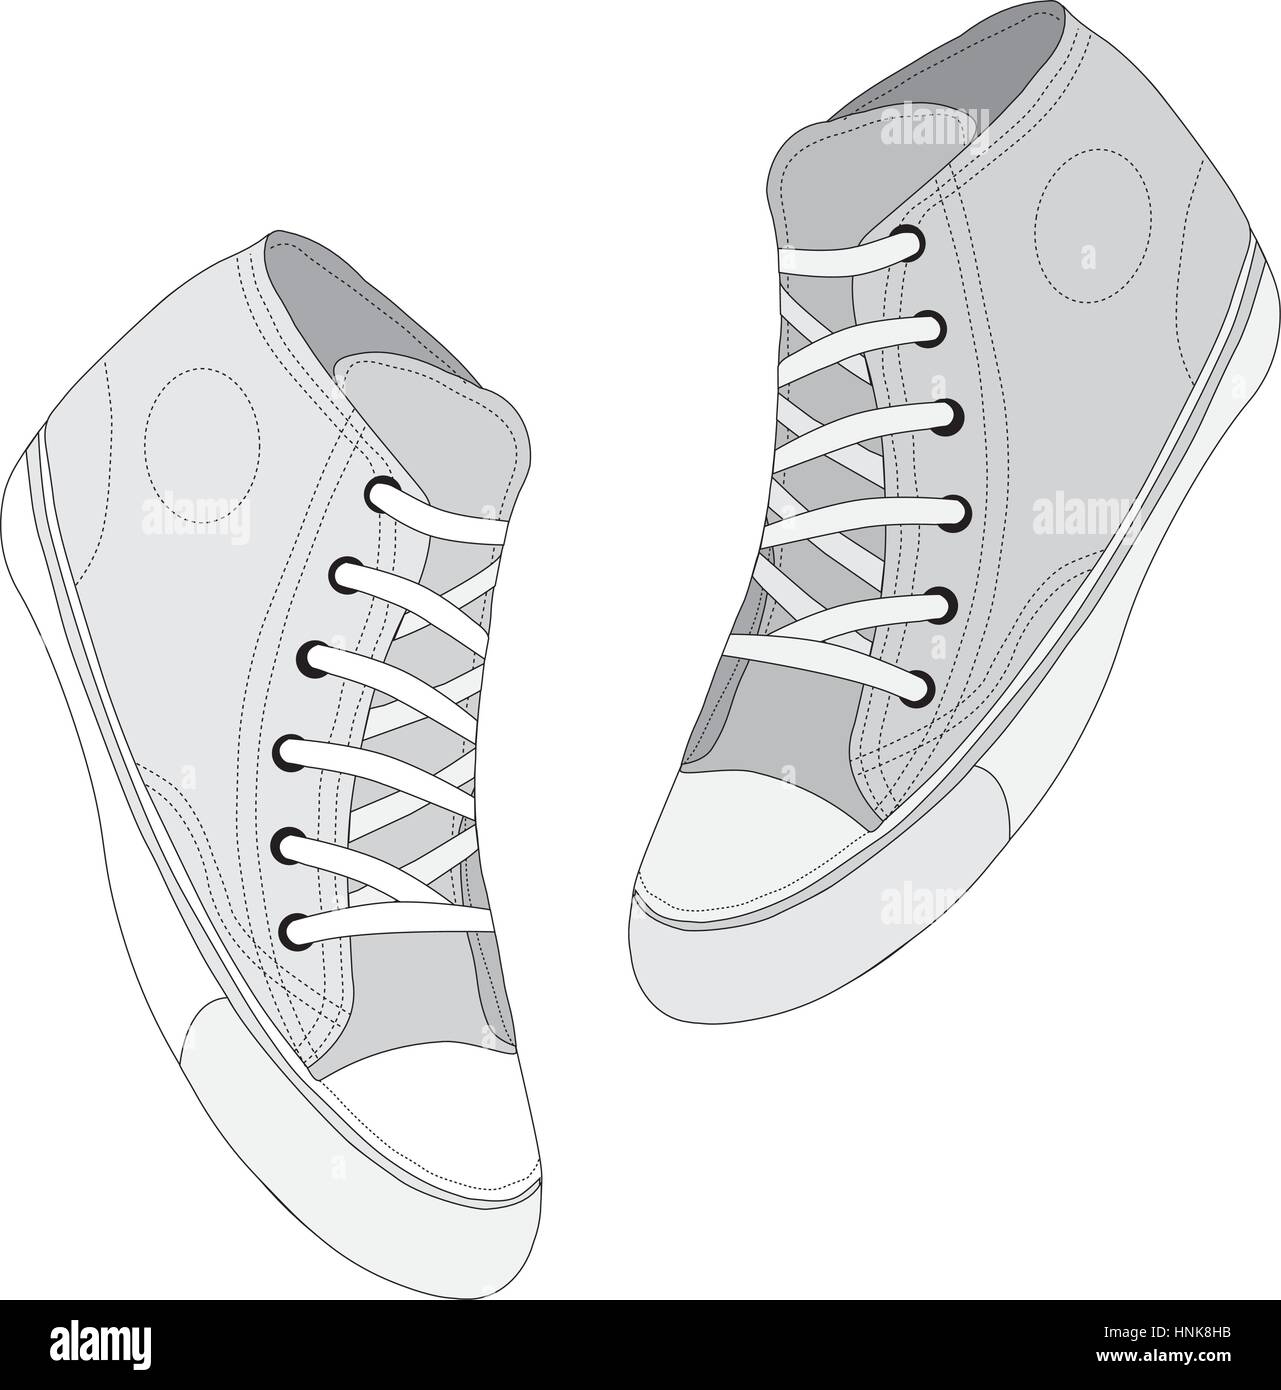 Classic sneaker sketched. Vector, fully editable. Set of sport shoes or sneakers icons in different views. Footwear and lace, clothing and street styl Stock Vector